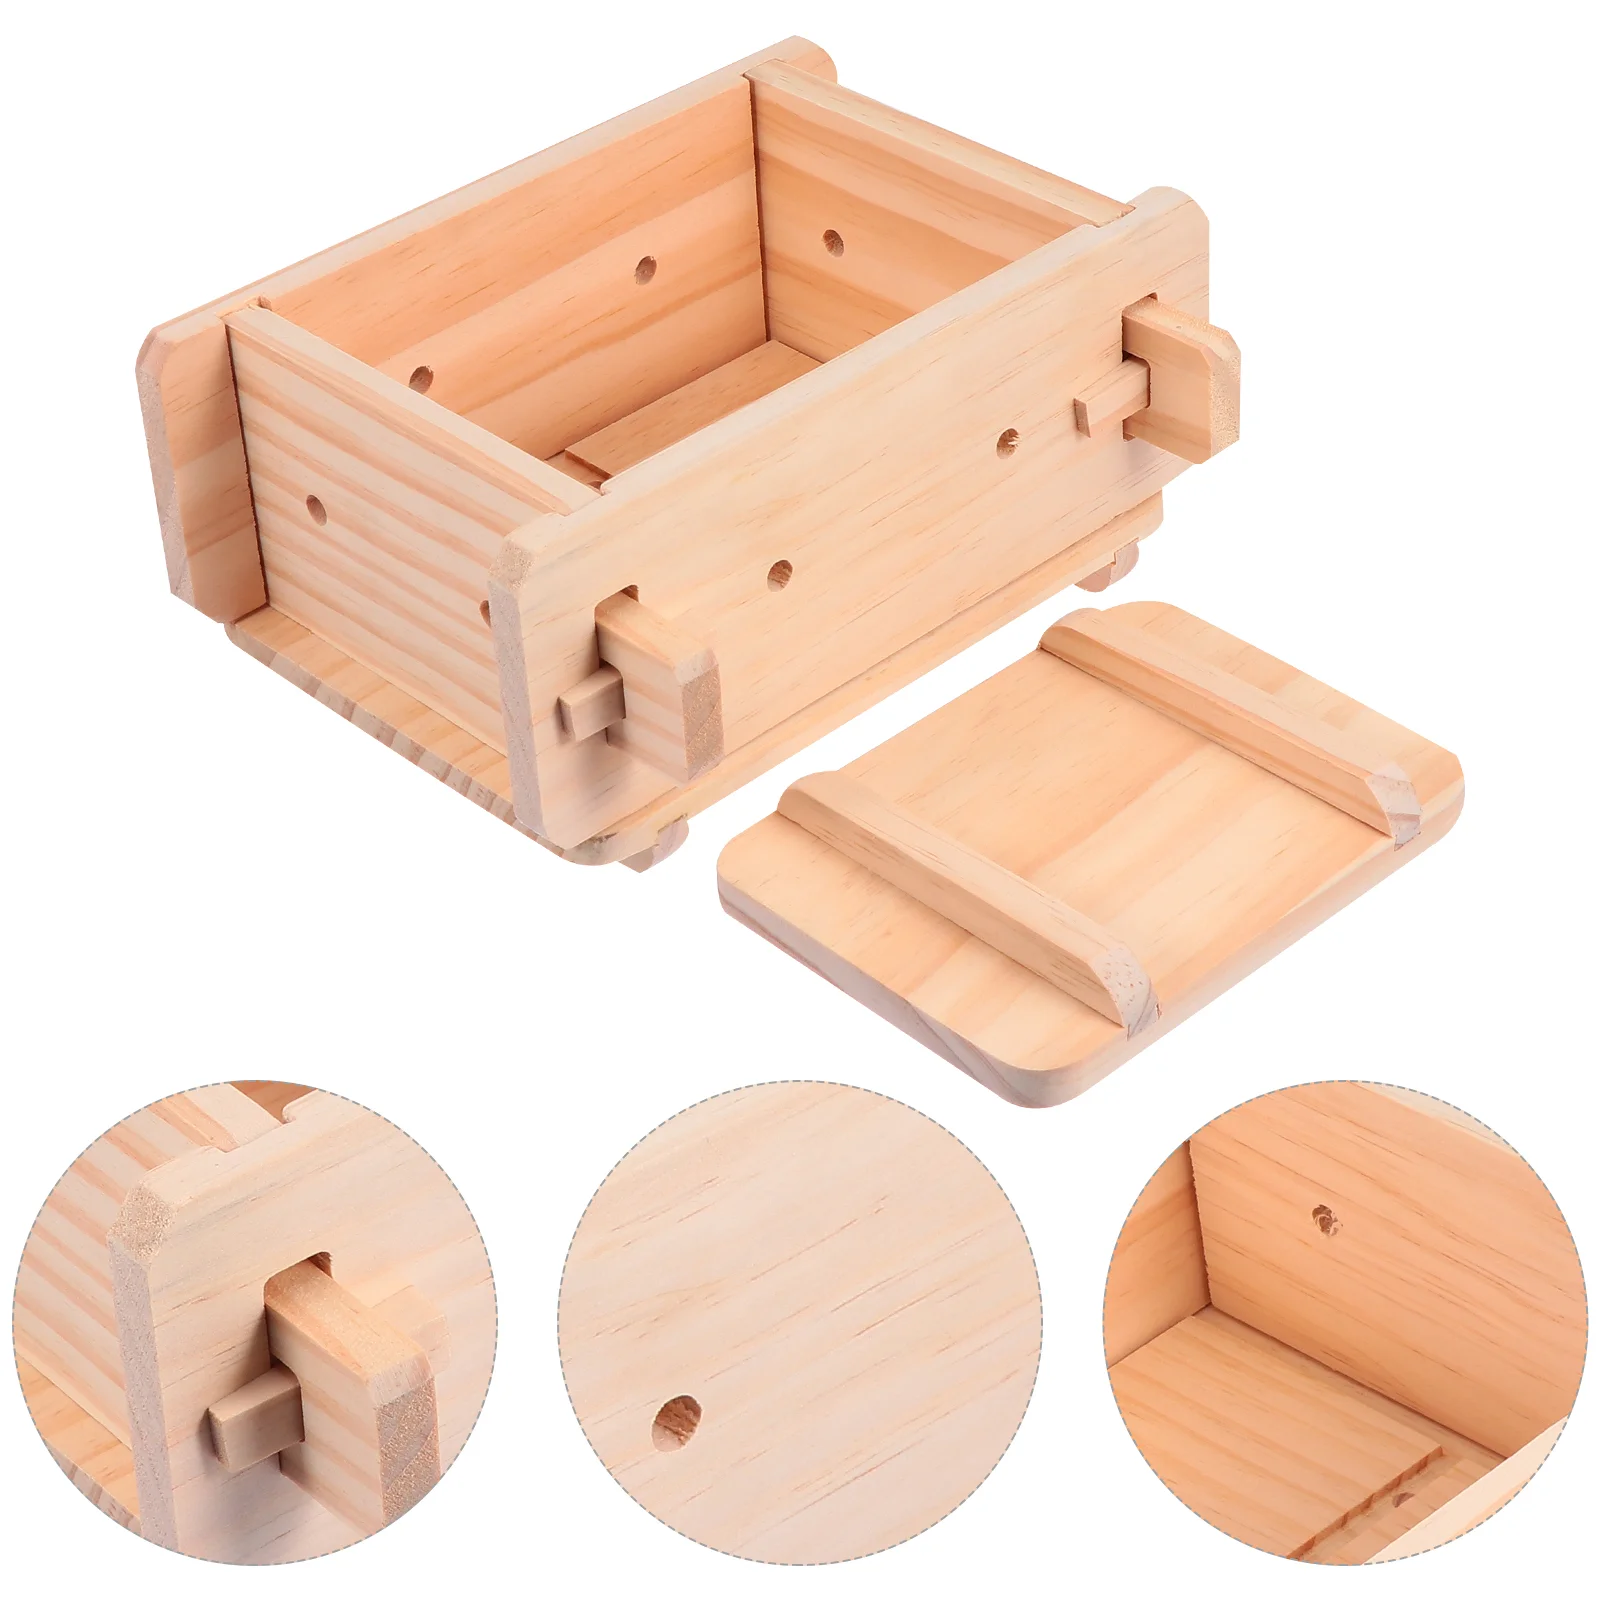 

Tofu Maker Press Mold Wooden Making Cheese Presser Kit Wood Box Mould Tool Home Diy Pressing Homemade Curd Woden Drainer Stamper